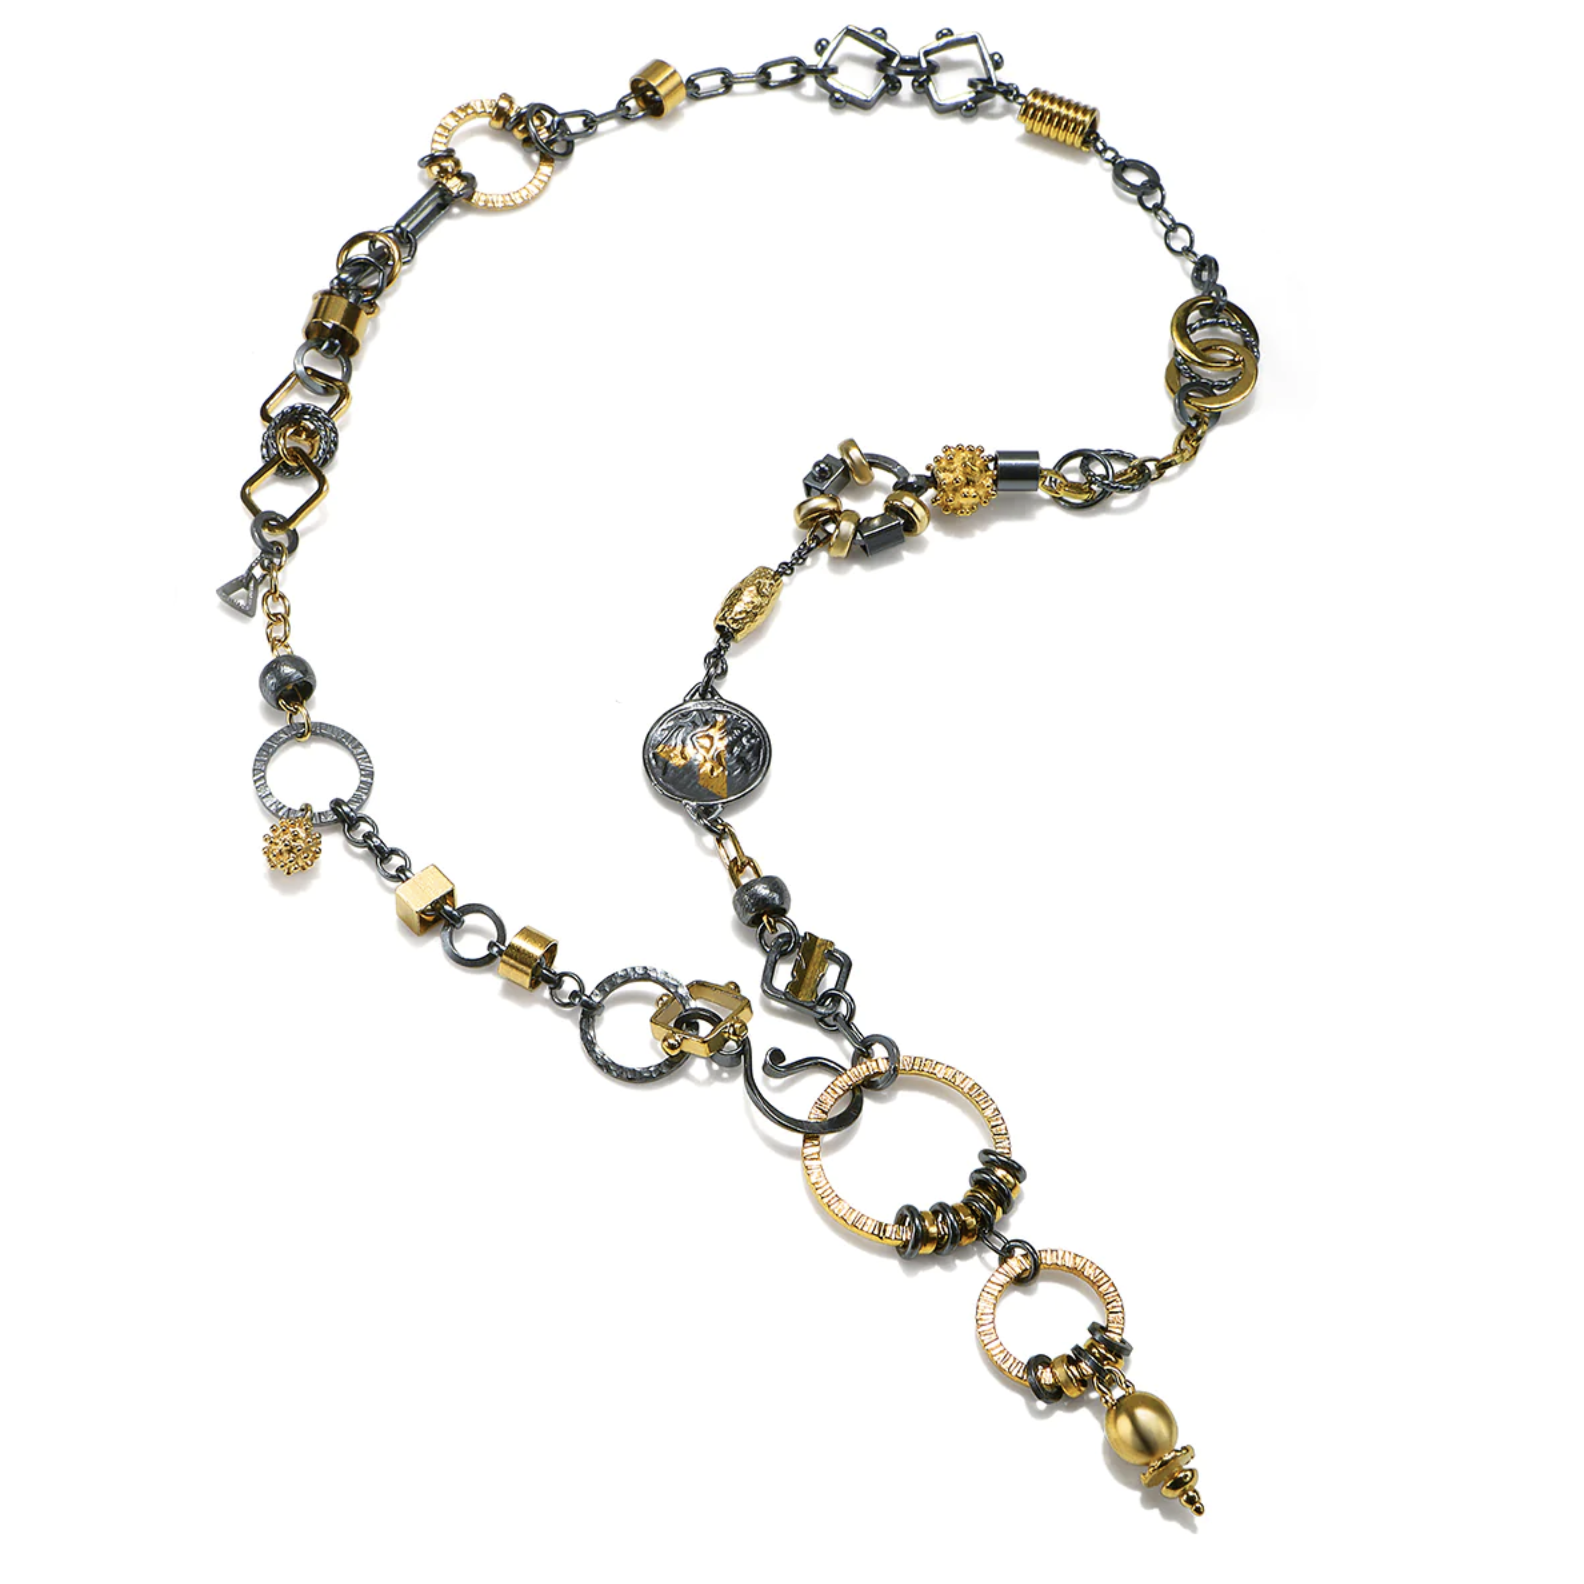 Black & Gold Plumb Sculpture Necklace with Diamond by Q Evon